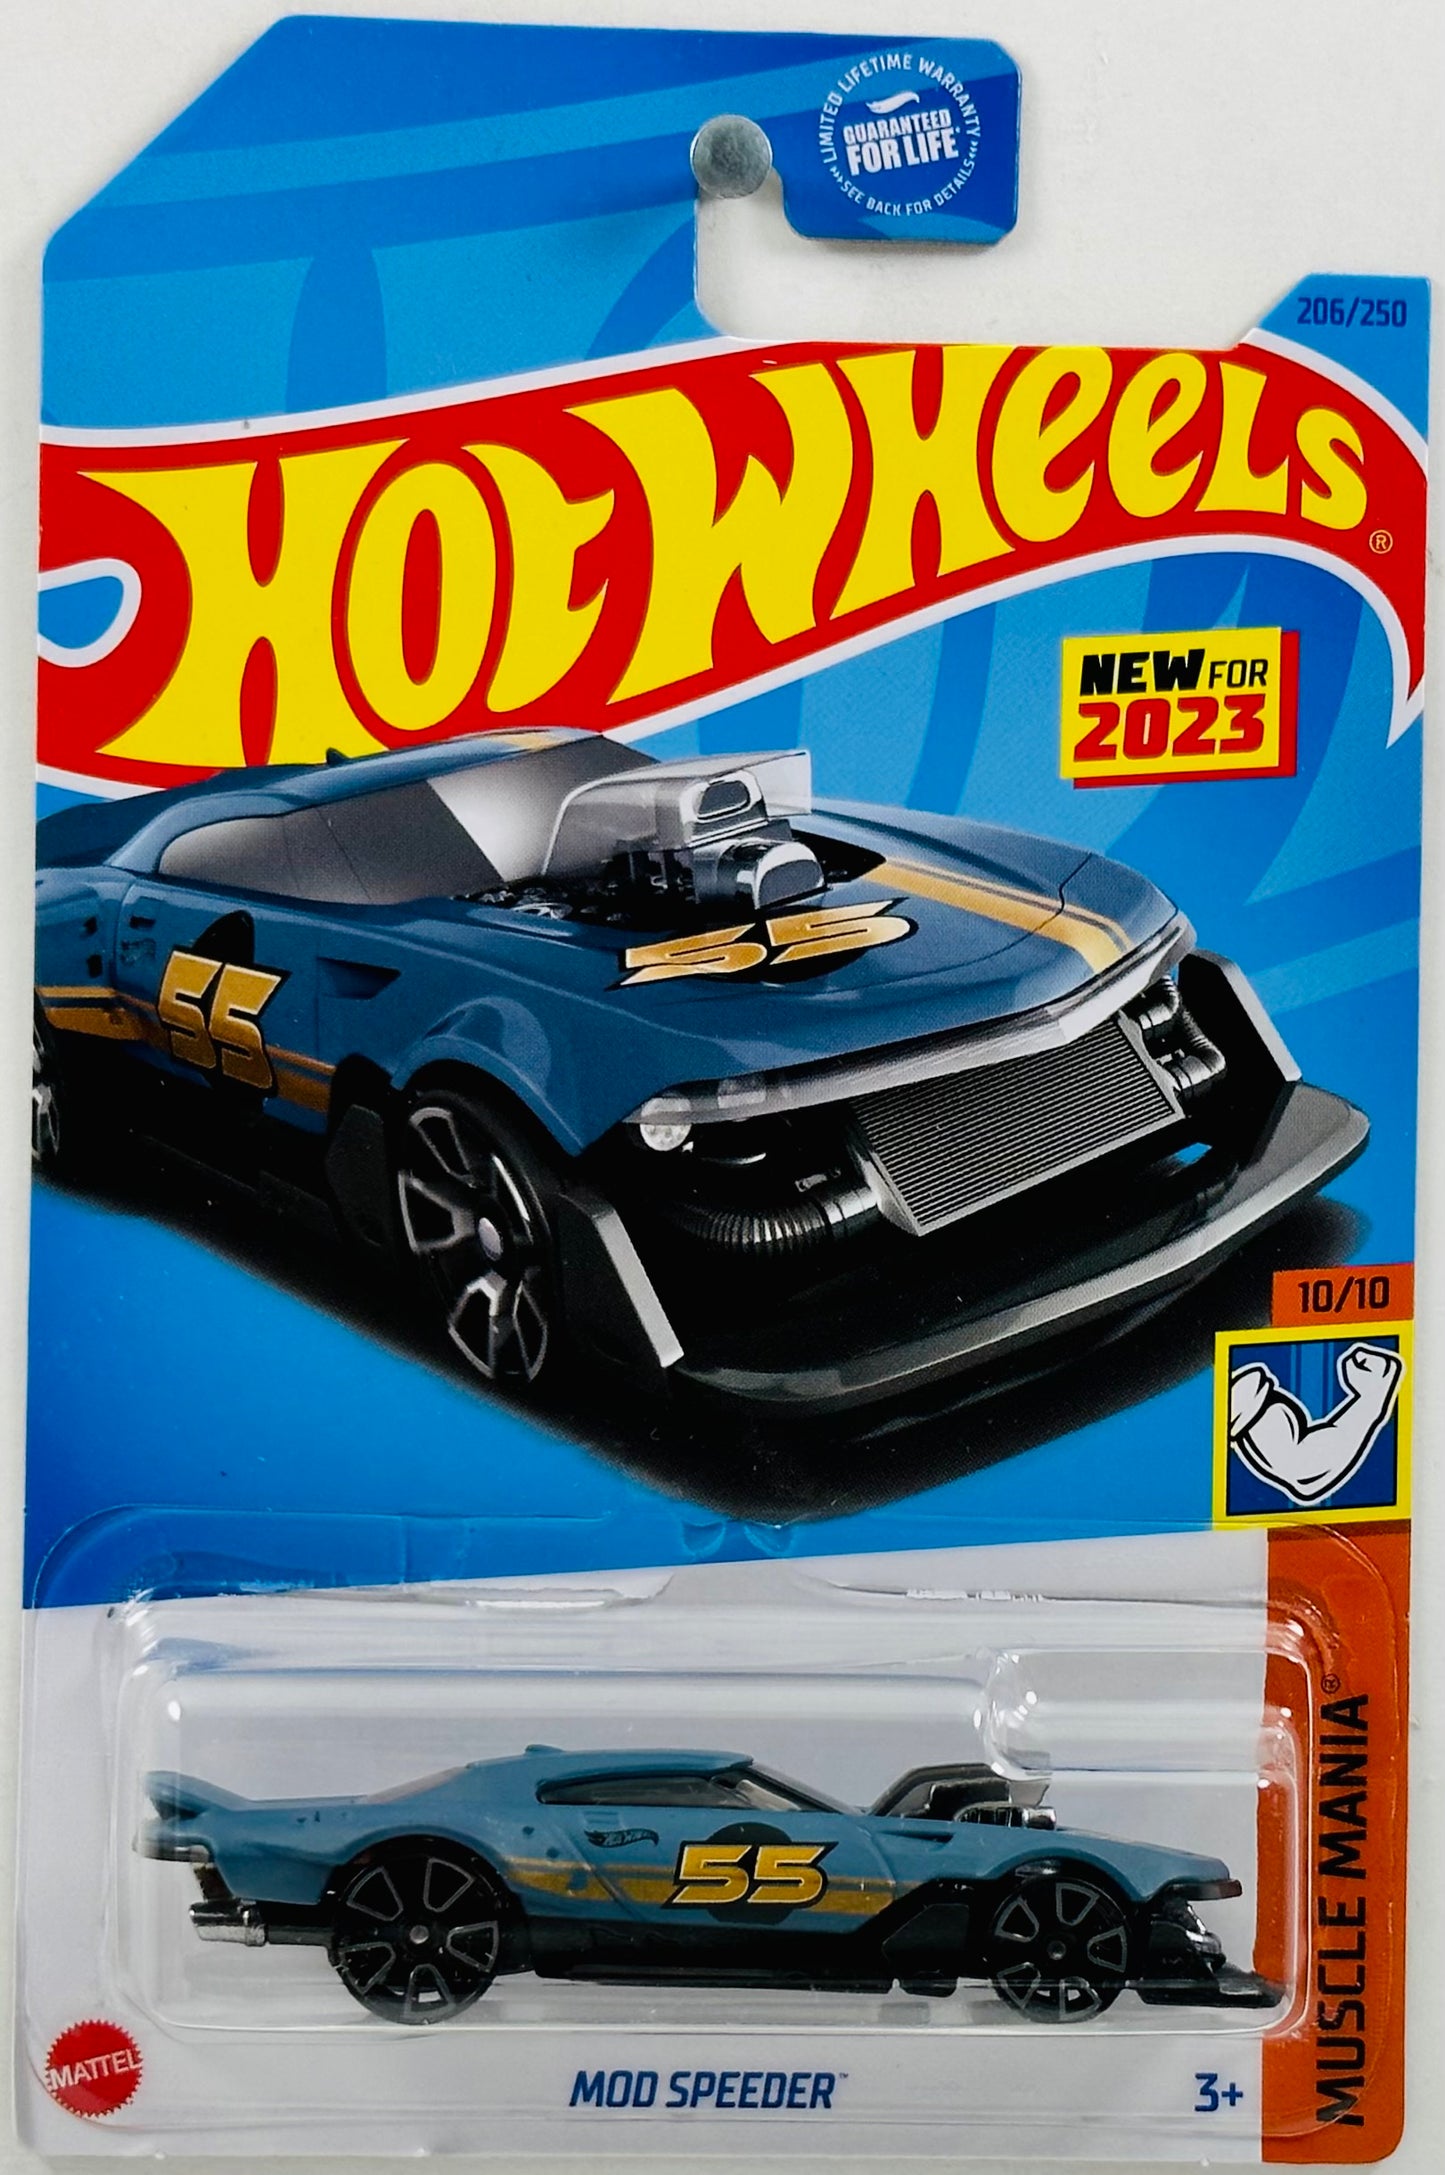 Hot Wheels 2023 - Collector # 206/250 - Muscle Mania 10/10 - New Models - Mod Speeder - Matte Moody Blue - USA